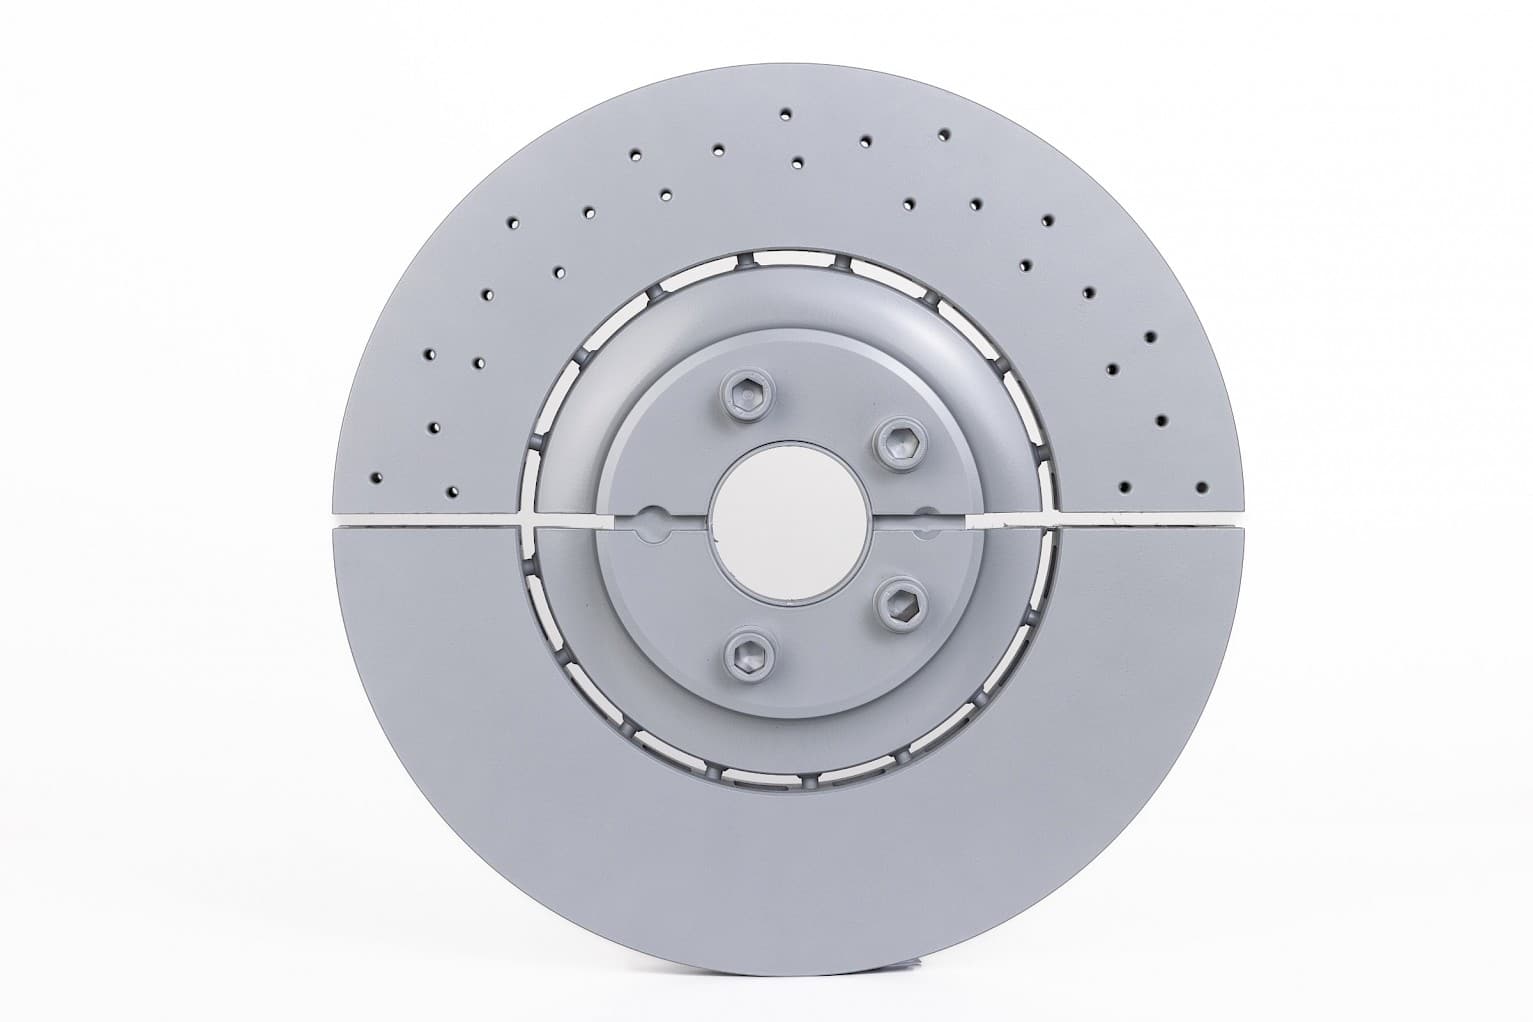 Zimmermann announced the Formula Z cross-drilled, compound rotor